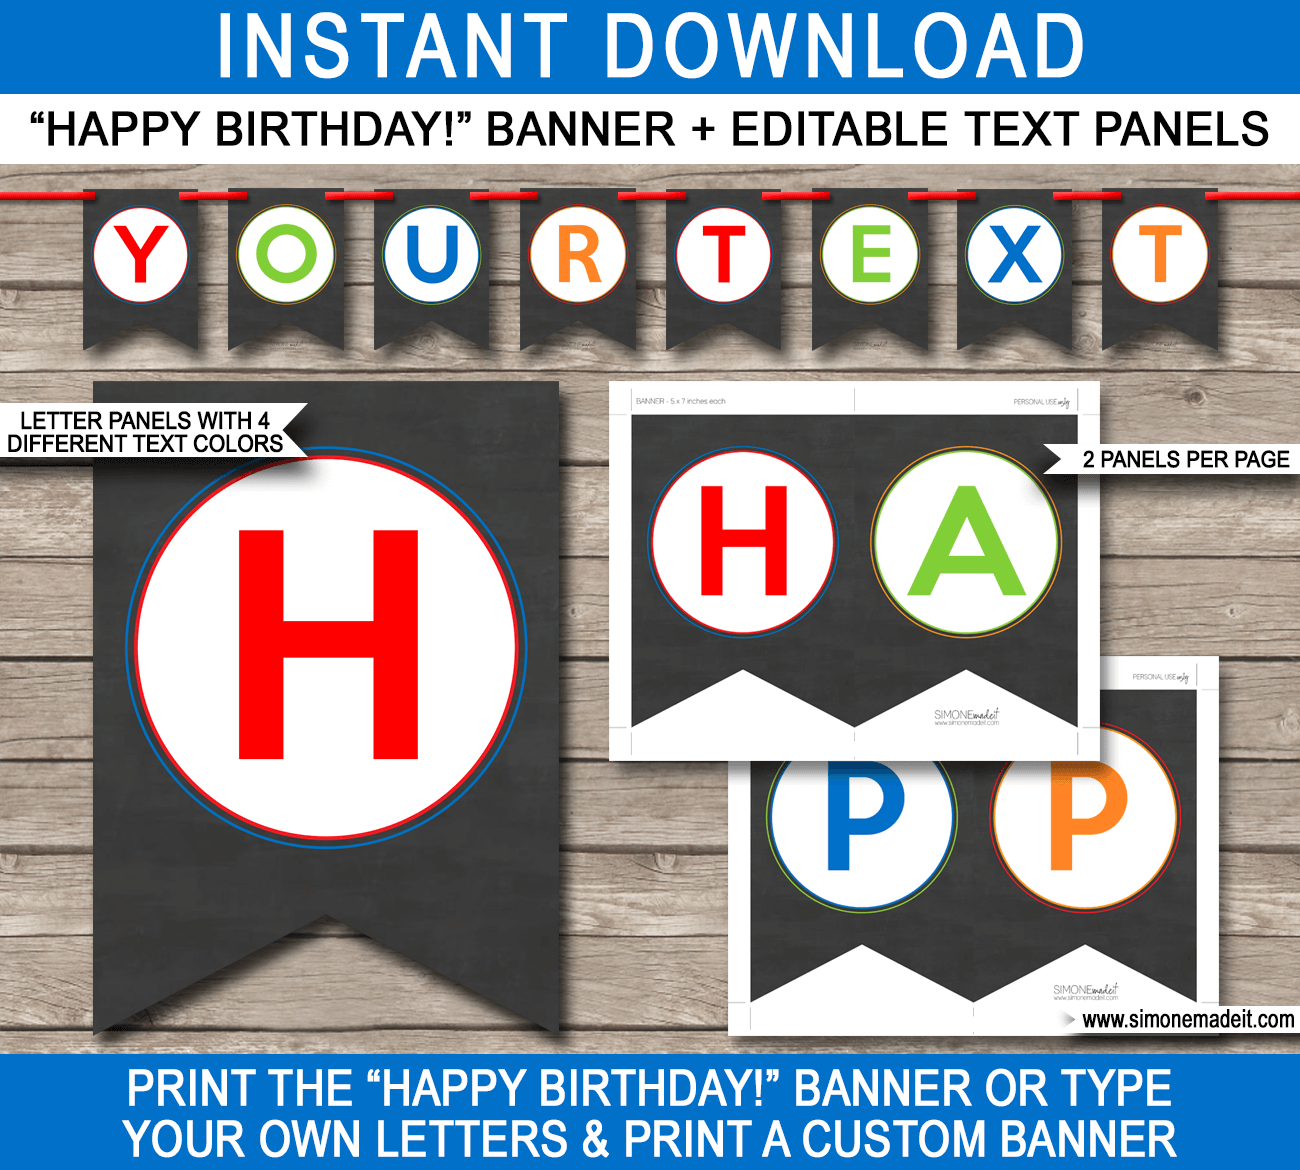 Chalkboard Birthday Party Banner Template - Birthday Party Bunting - Happy Birthday Banner - Editable and Printable DIY Template - INSTANT DOWNLOAD $4.50 via simonemadeit.com